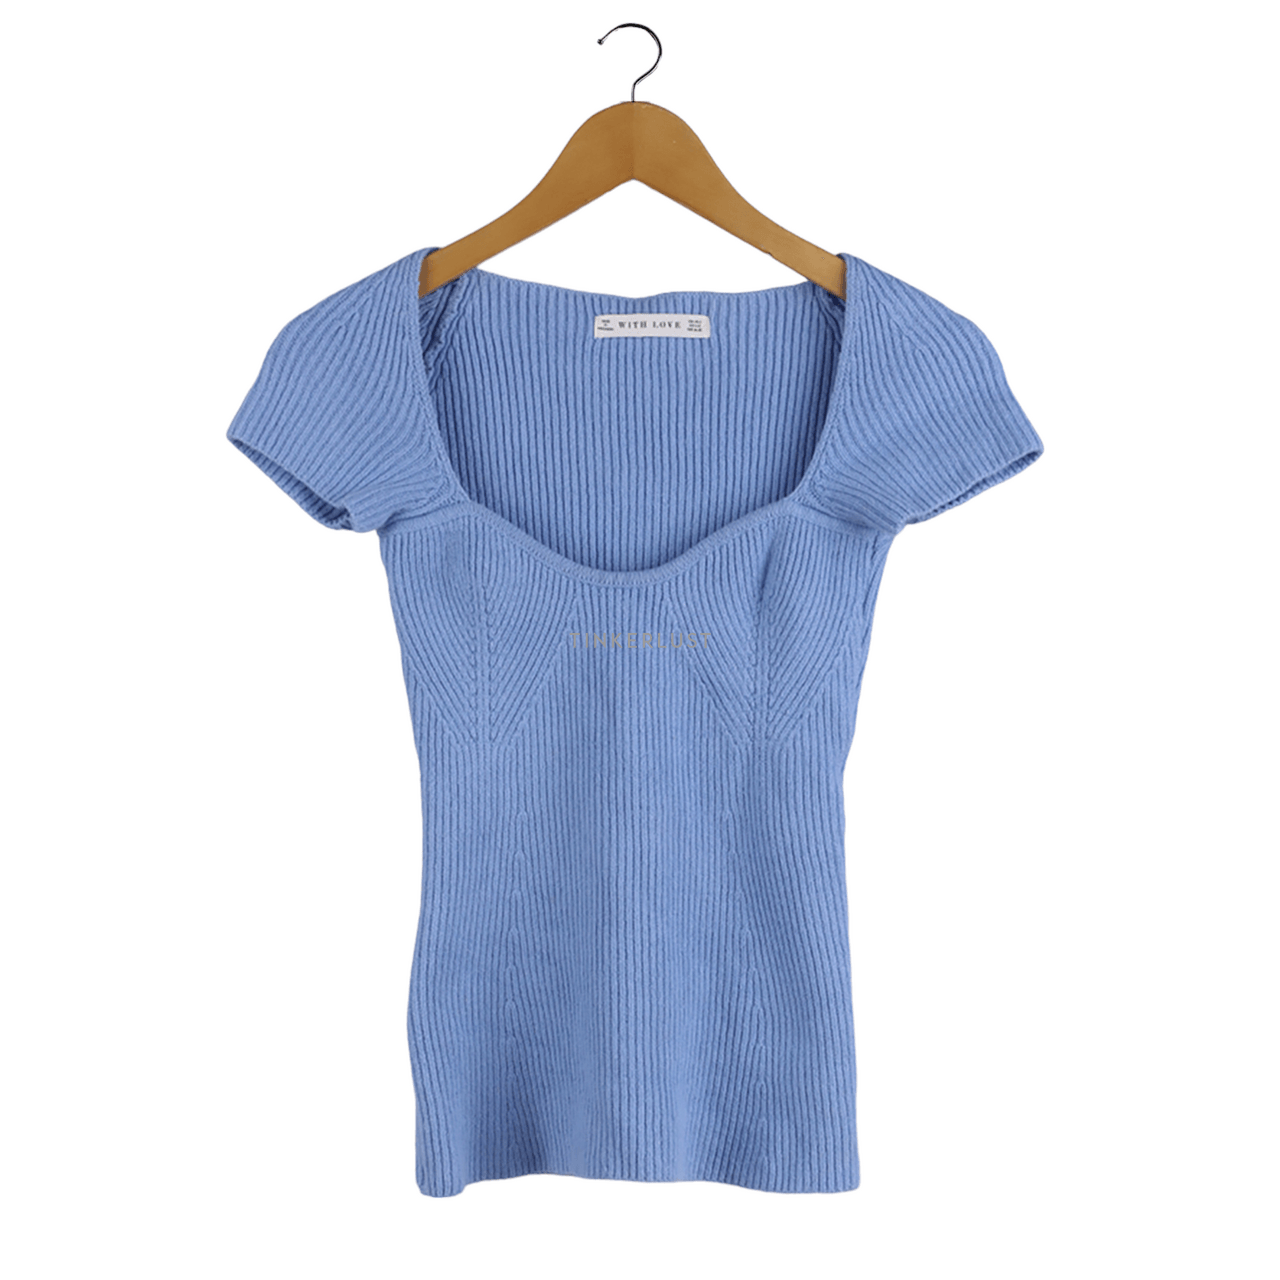 With Love Blue Knit Blouse